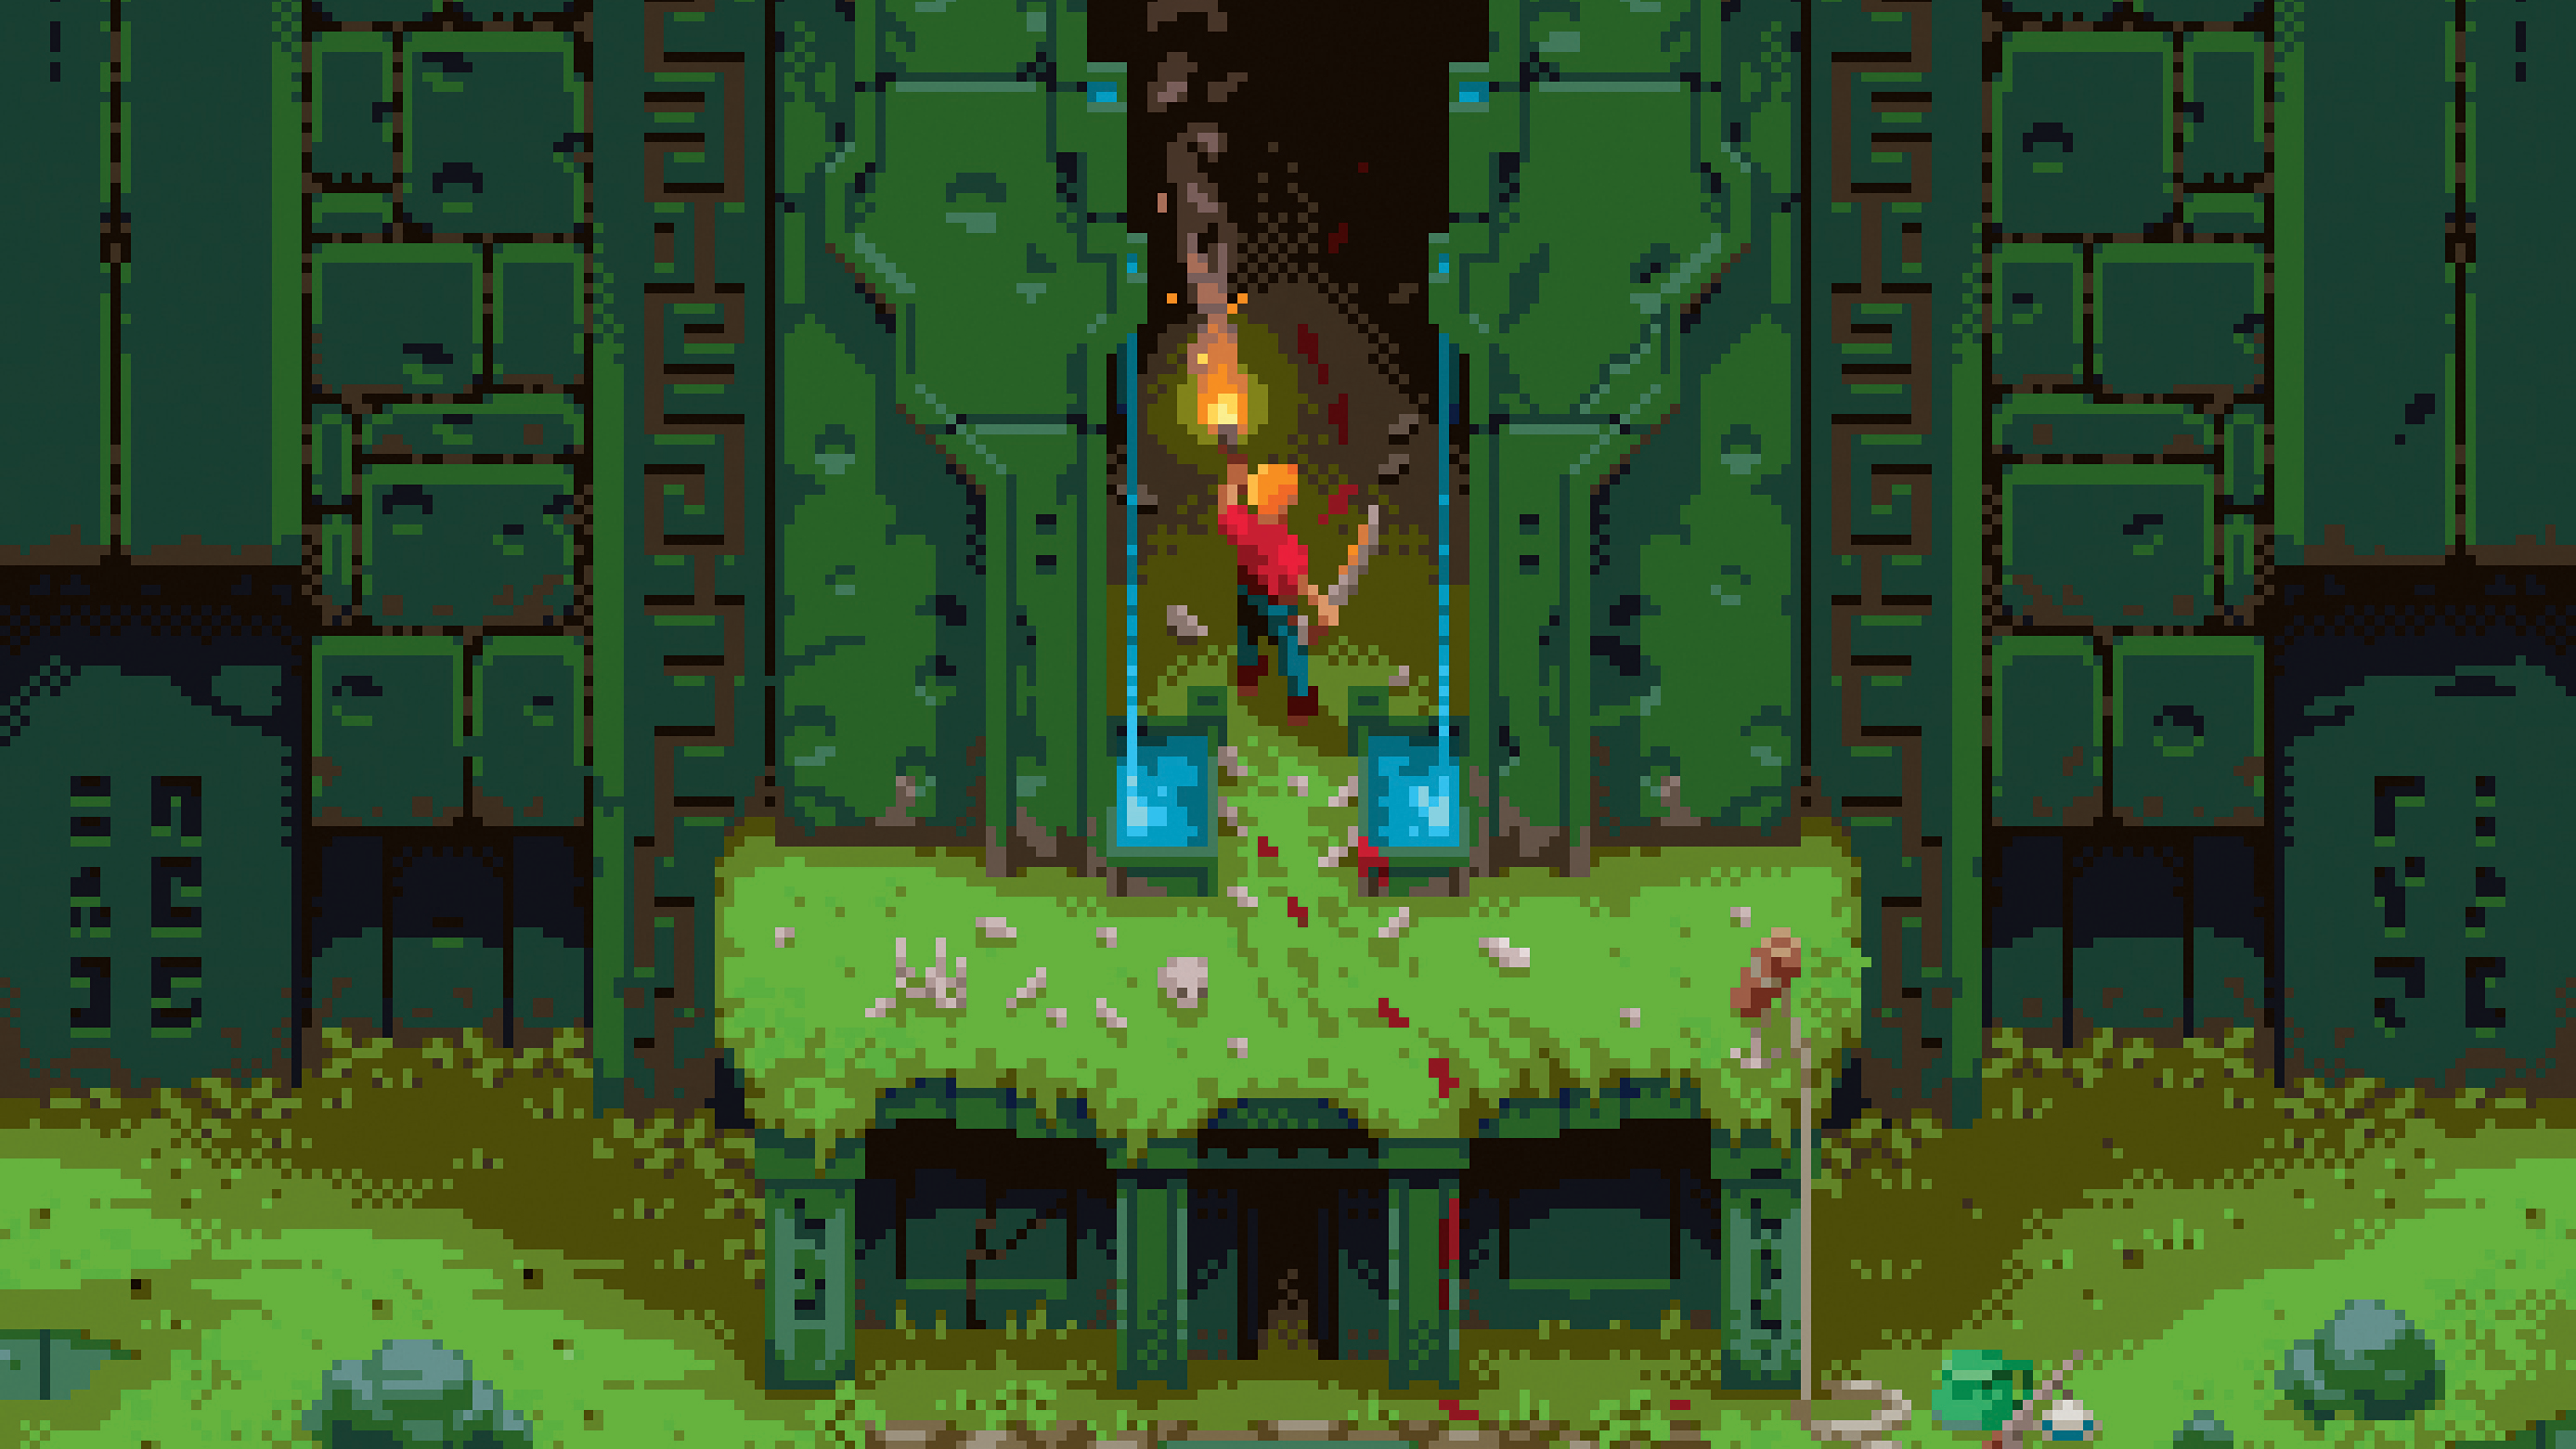 Pixel art: Temple in the heart of the jungle, covered in foliage